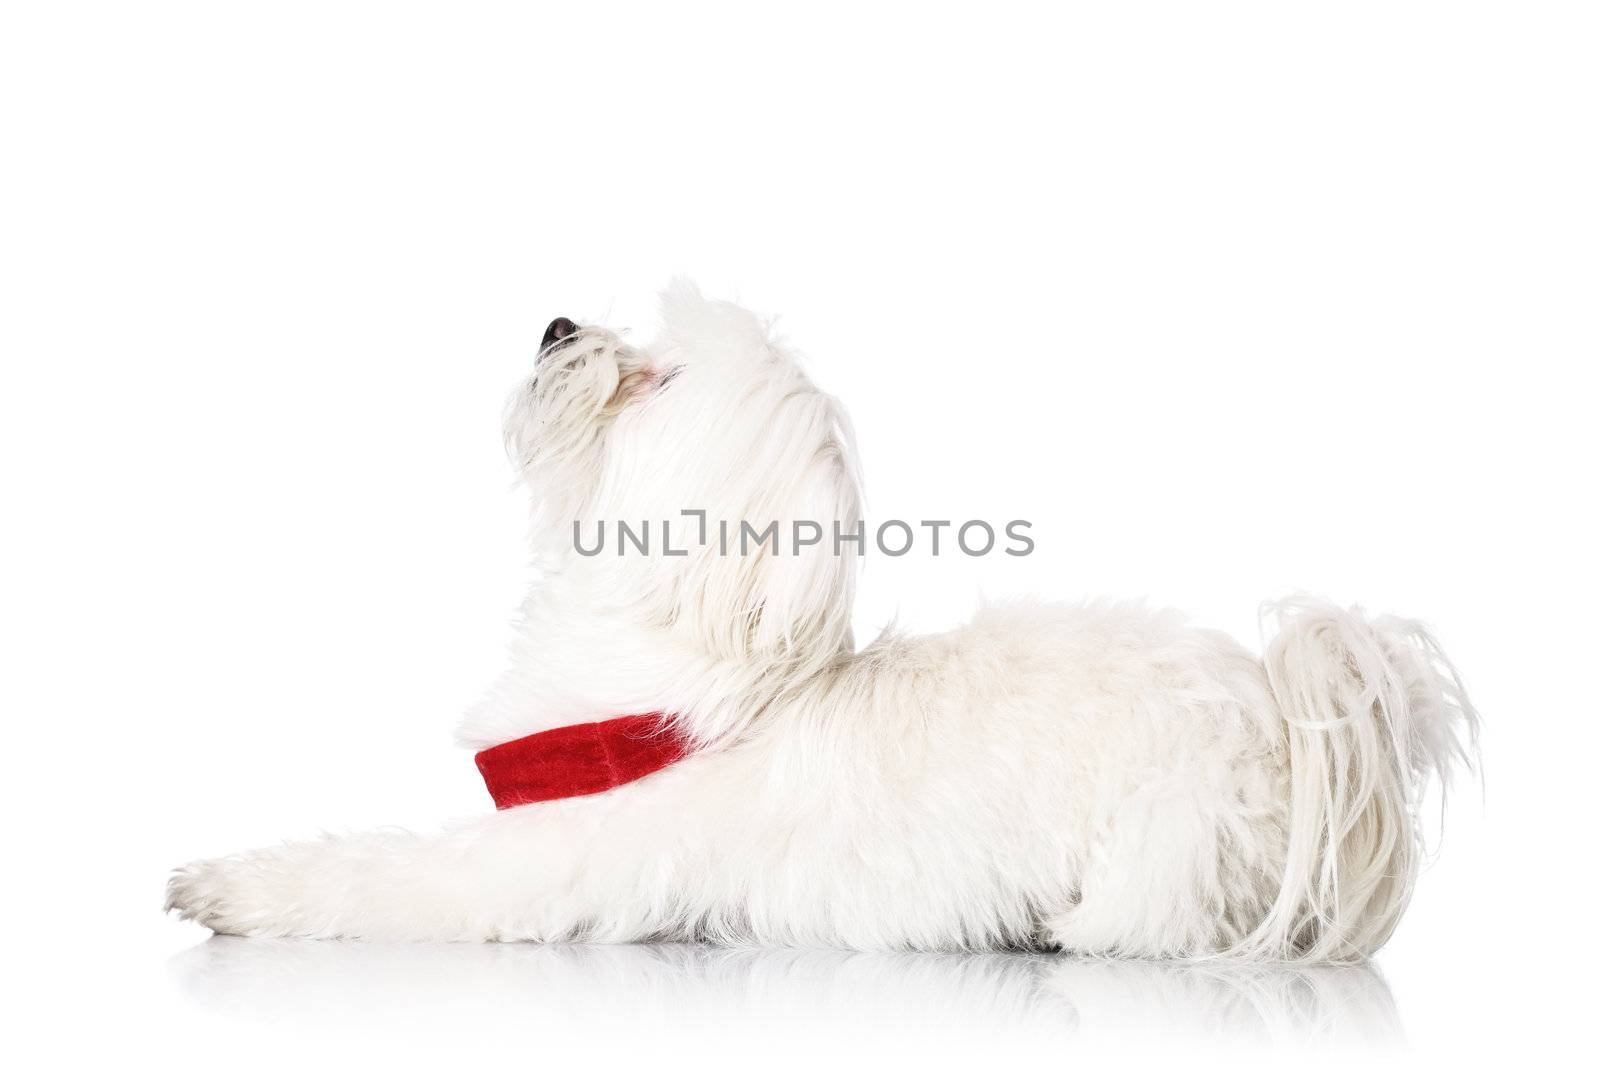 Bichon puppy with red collar isolated on white